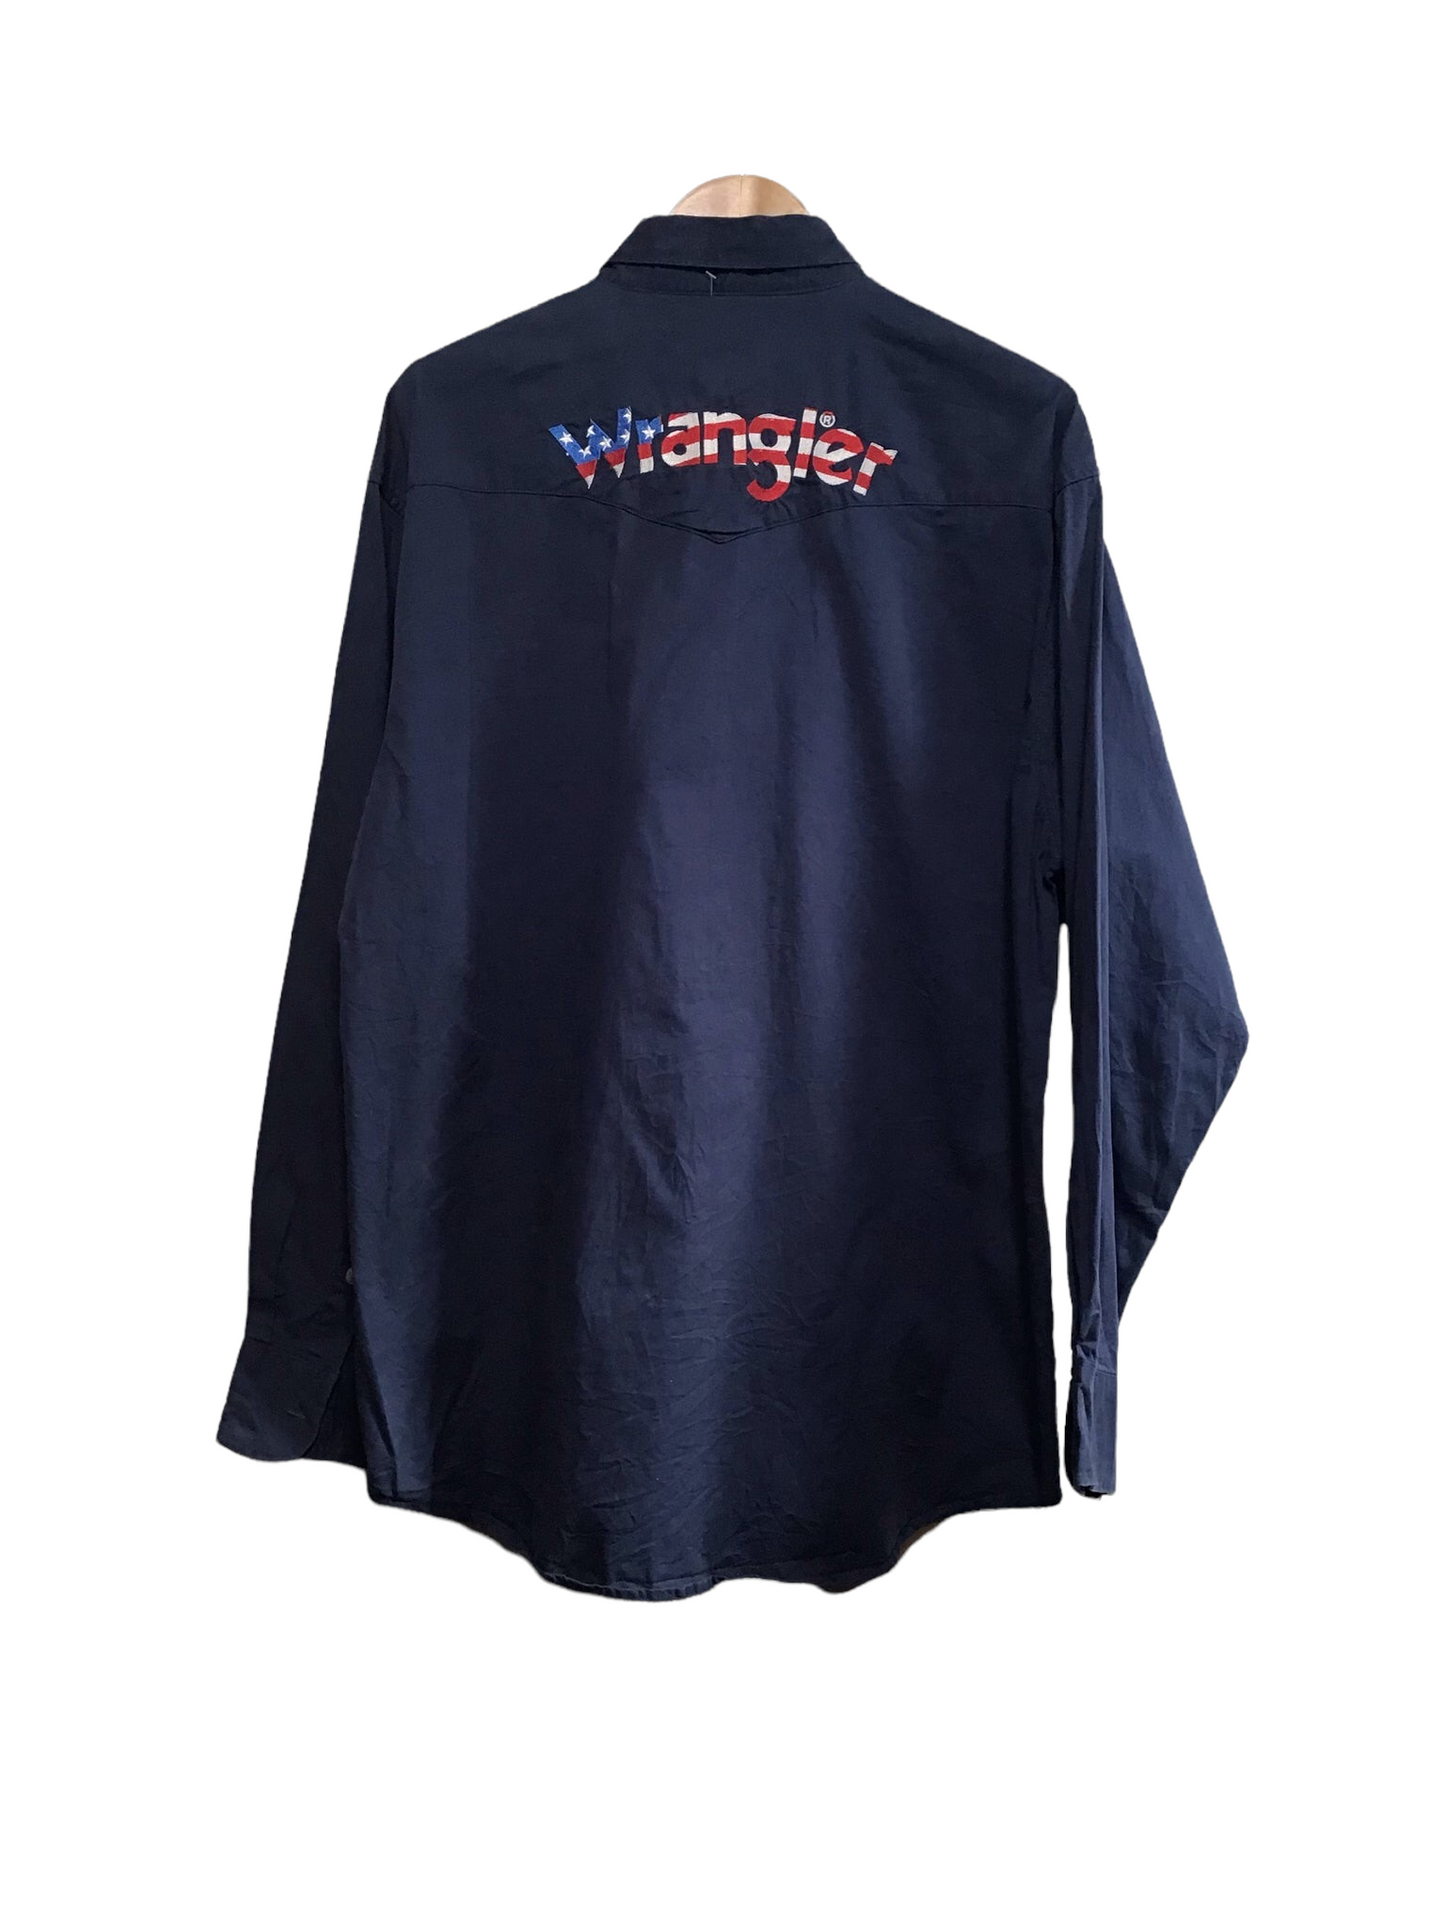 Wrangler Spell out Navy Shirt (Size L)